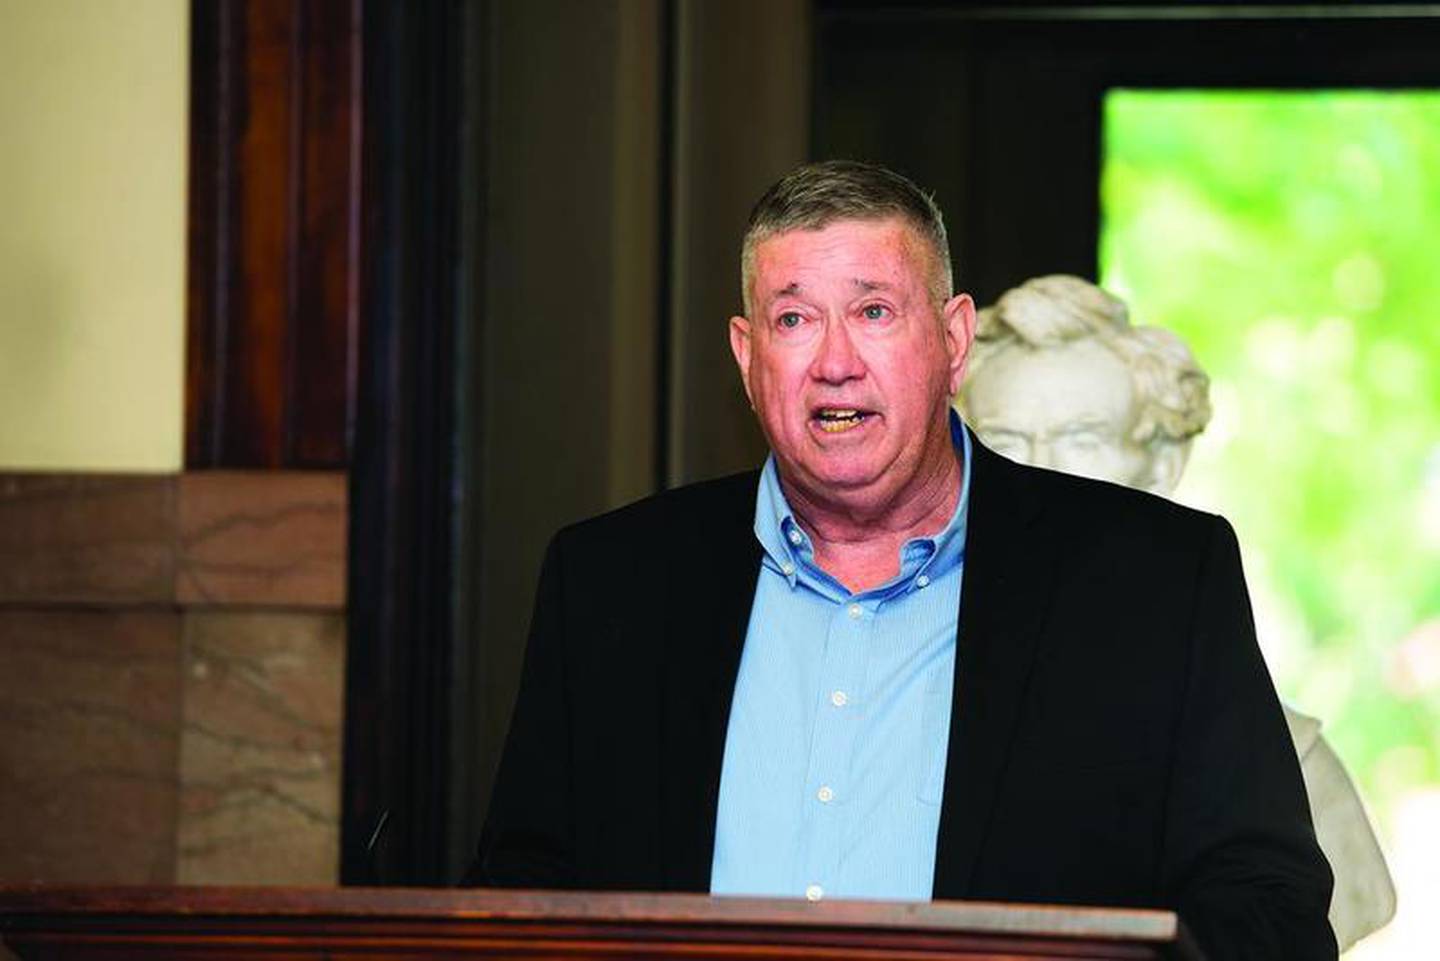 Lee County Treasurer John Fritts announced Monday that he won't seek re-election during a press conference at the old Lee County Courthouse. Fritts also endorsed fellow Republican and Chief Deputy Treasurer, Melissa Lawrence, in her run to take his place.